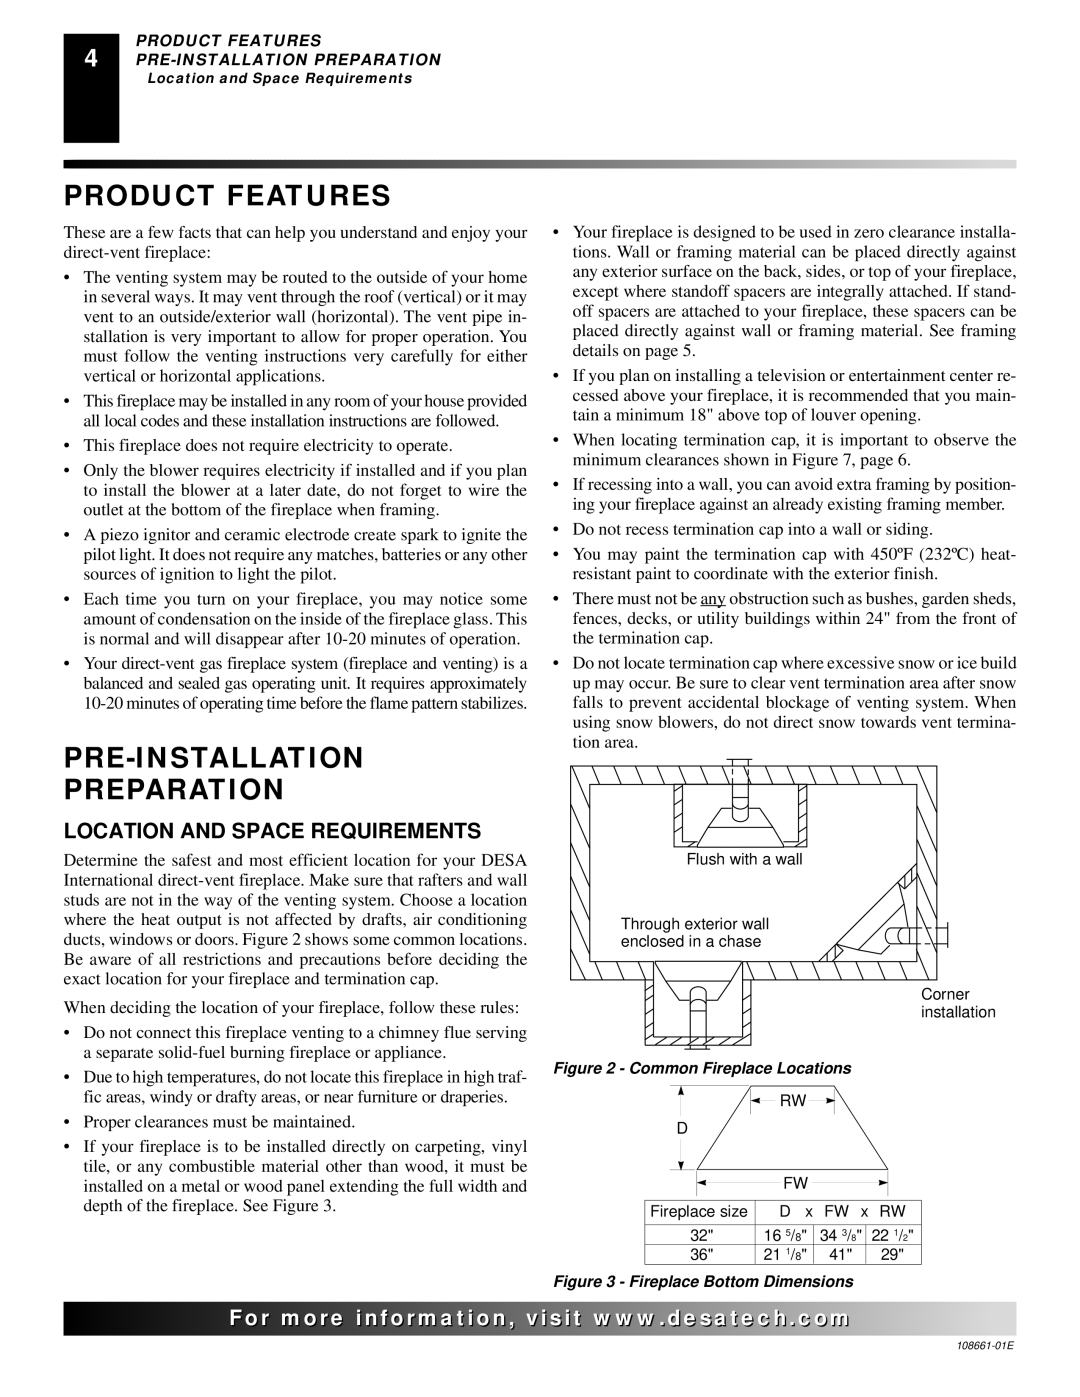 Desa (V)VC36N Series installation manual Product Features, PRE-INSTALLATION Preparation, Location and Space Requirements 